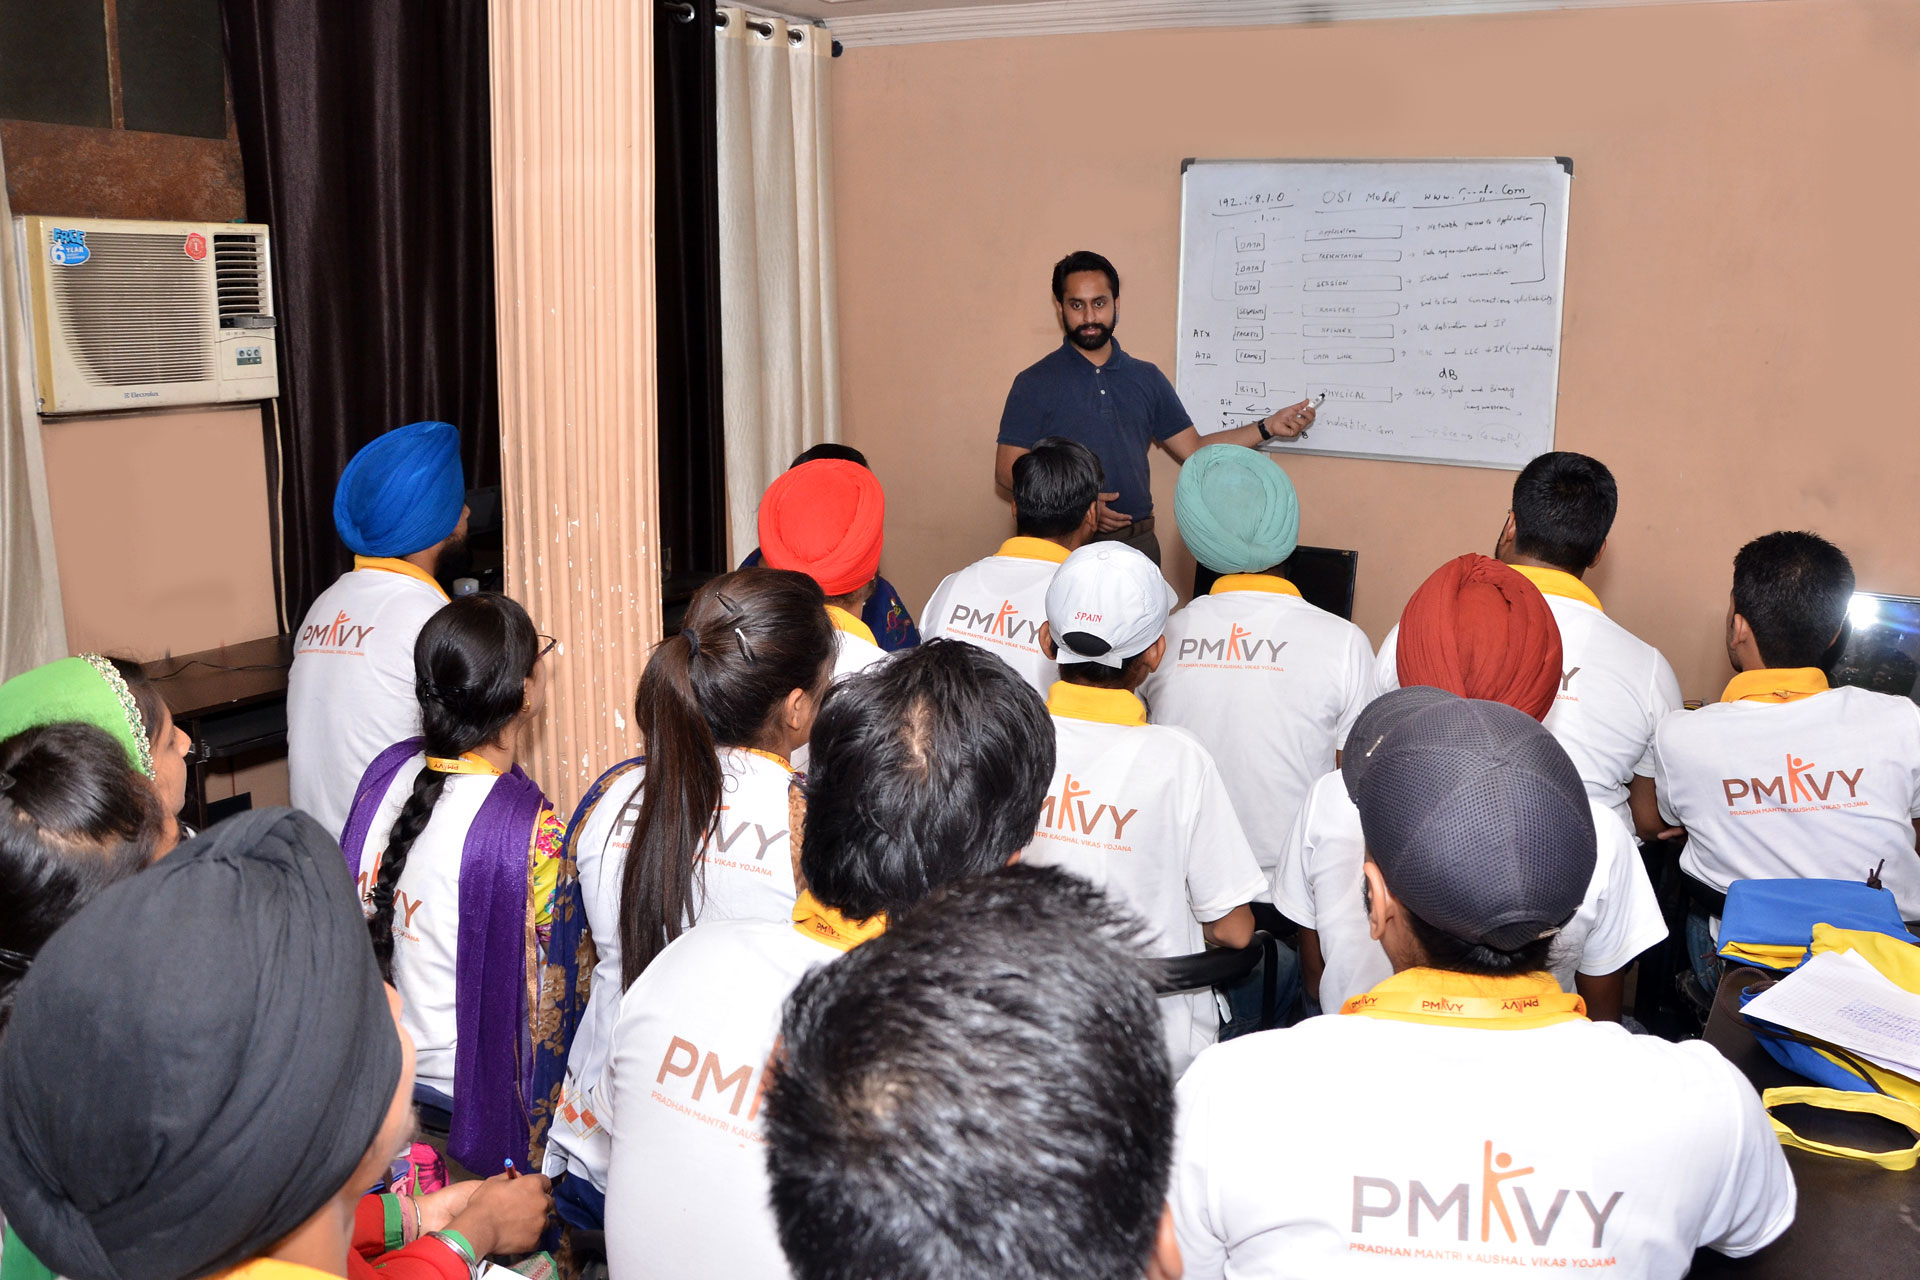 GRD Technical Centre - Technical Training Centre in Amritsar, Punjab